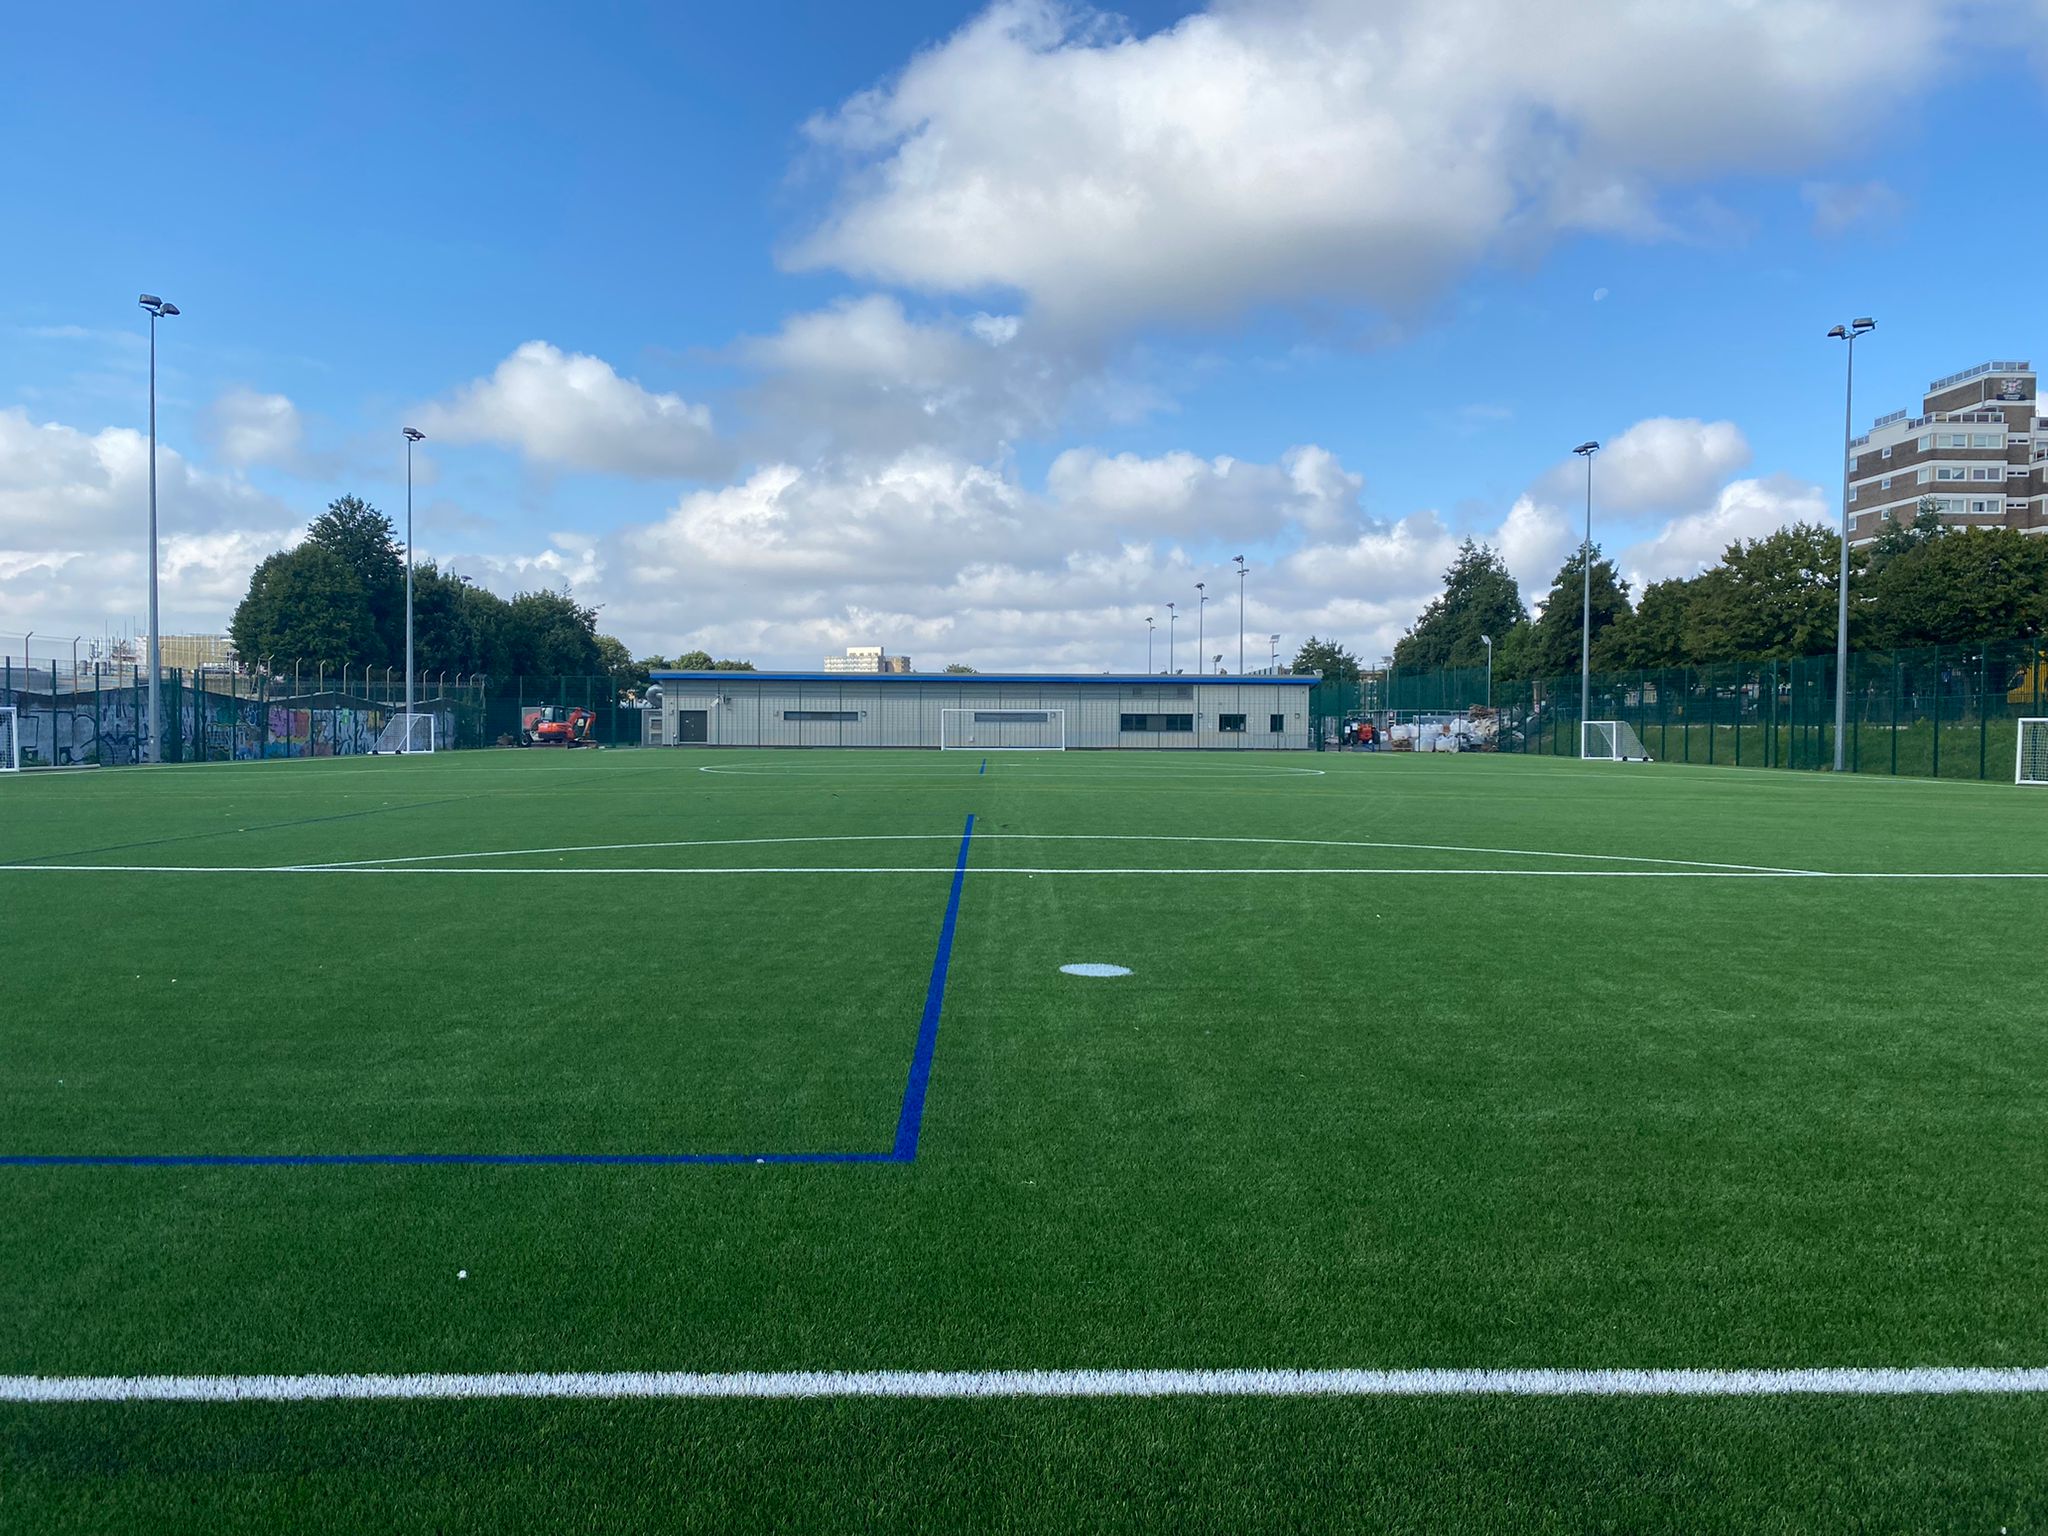 As sports pitch contractors, we always go the extra mile for our clients and this football resurfacing project at Market Road was no exception.